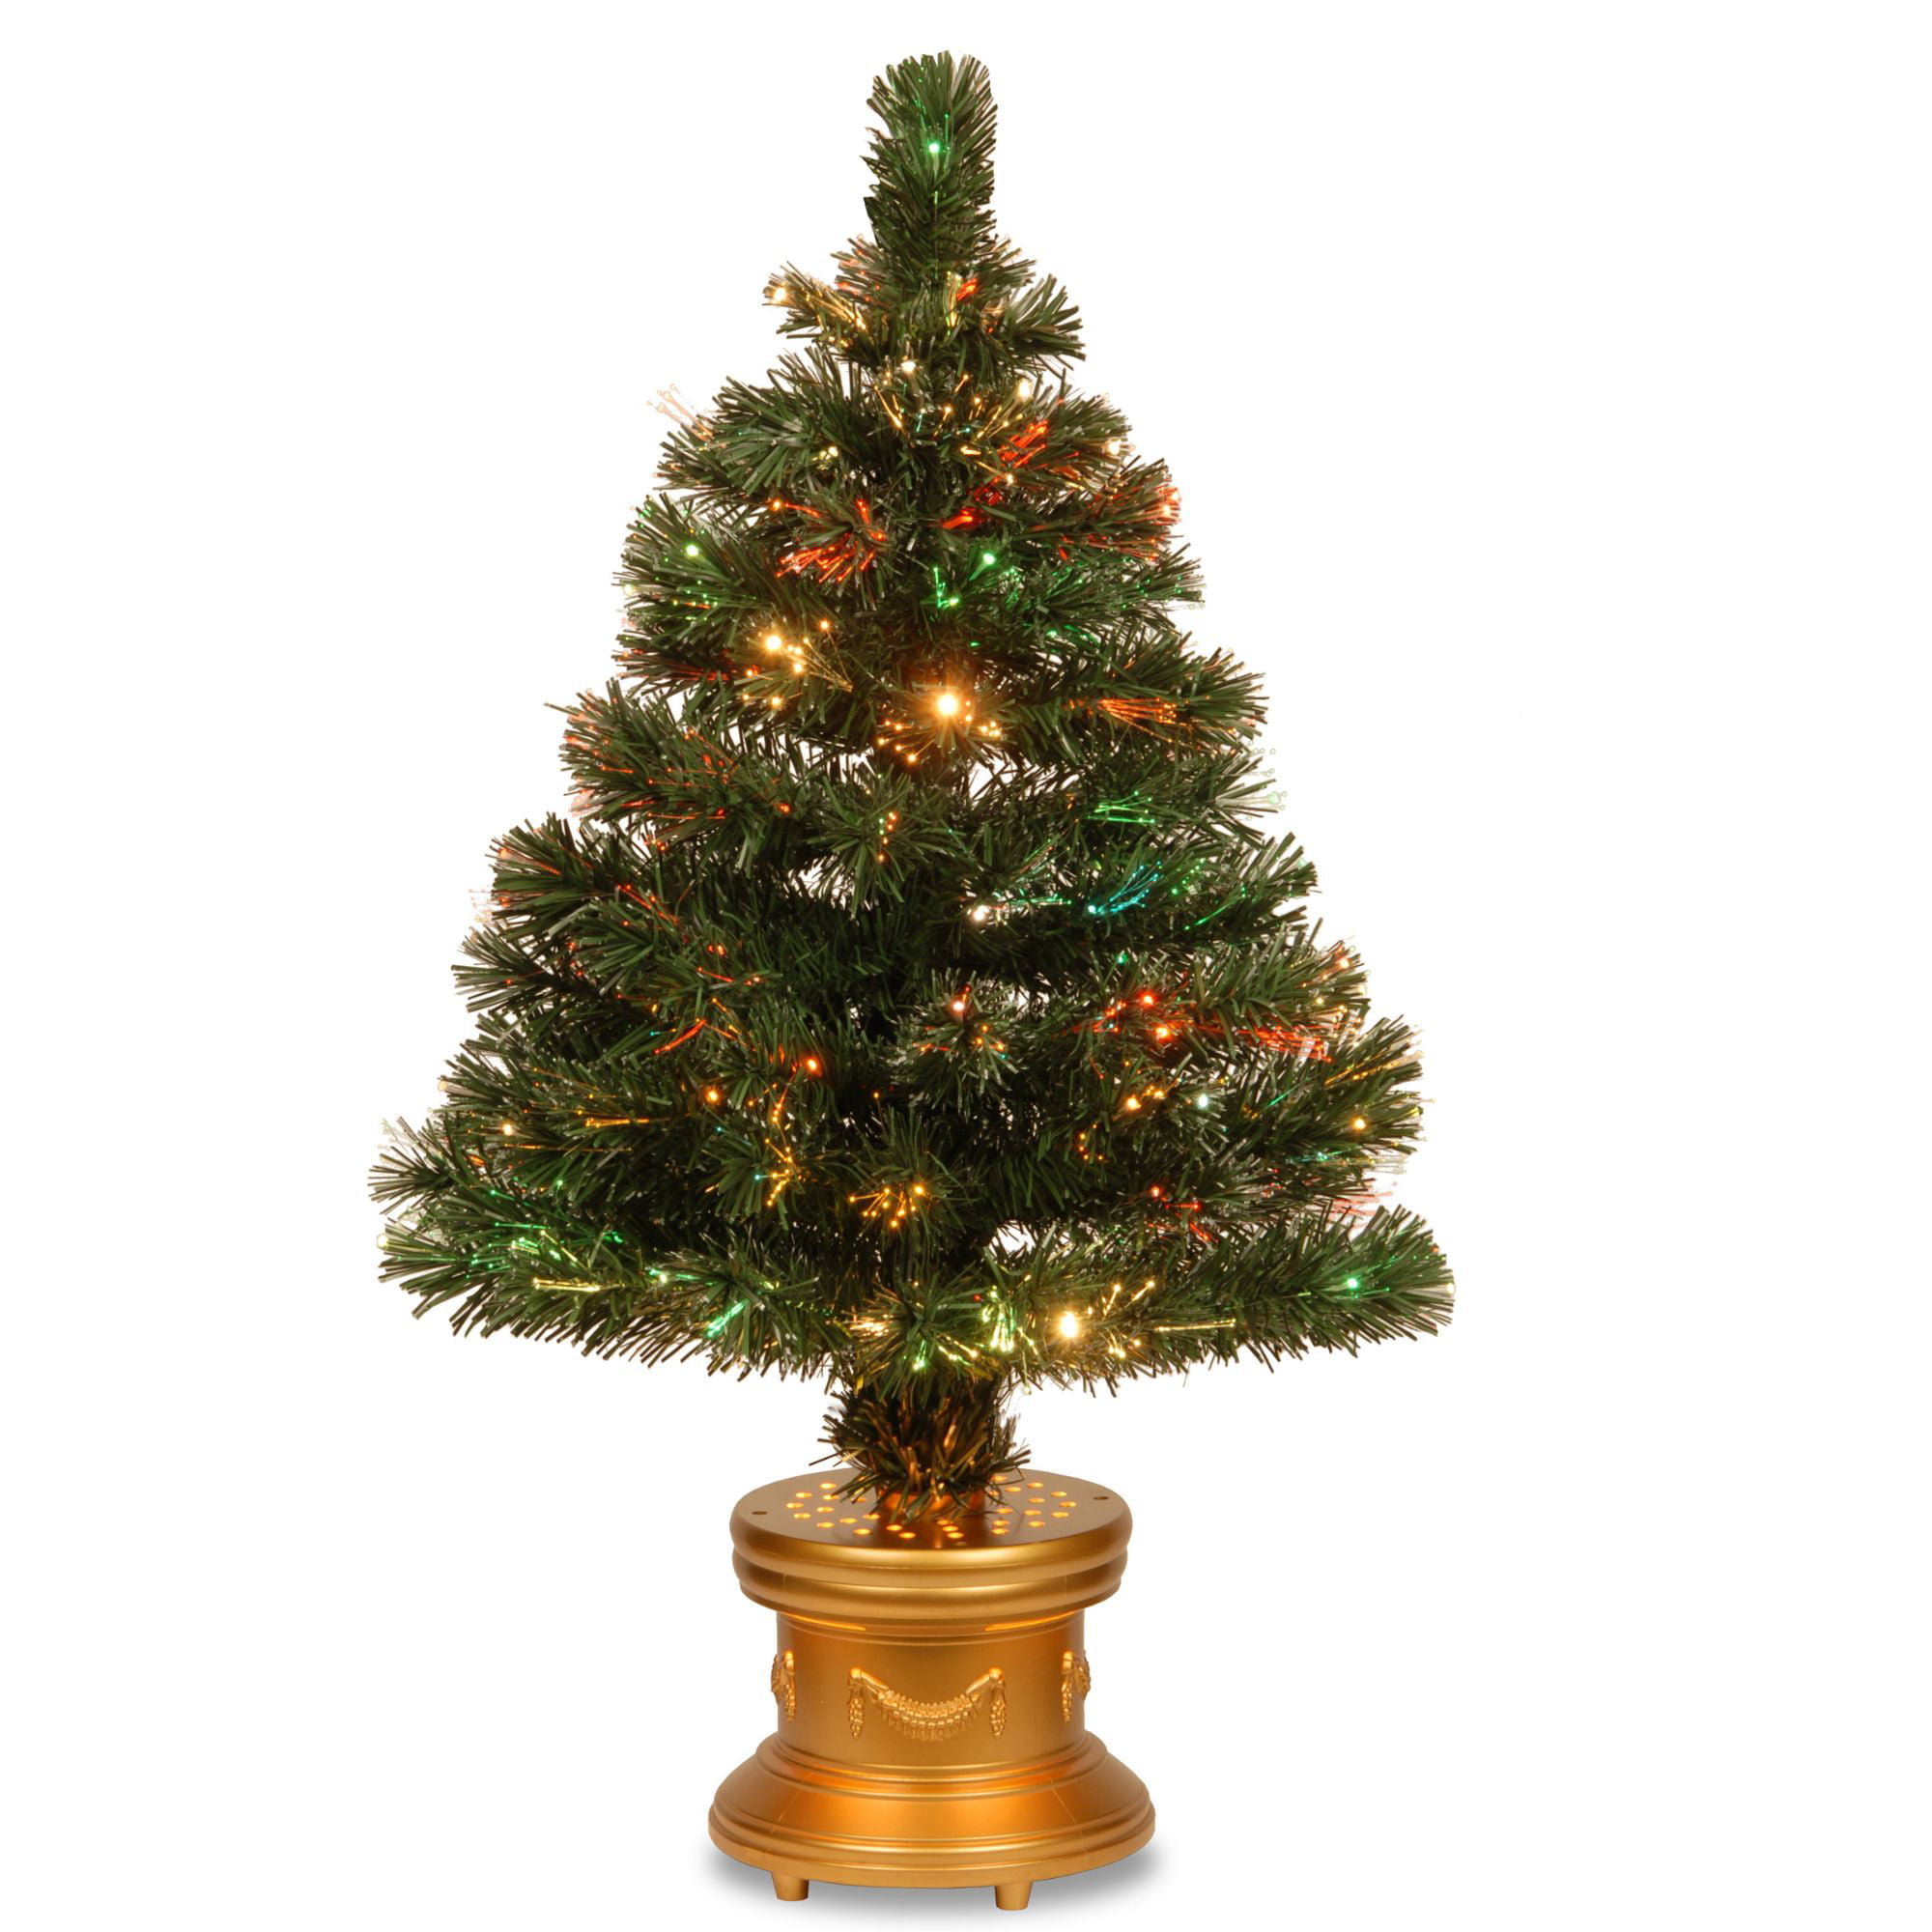 Little White House Decorated Fiber Optic Christmas Tree Pre-lit With LED Lights 